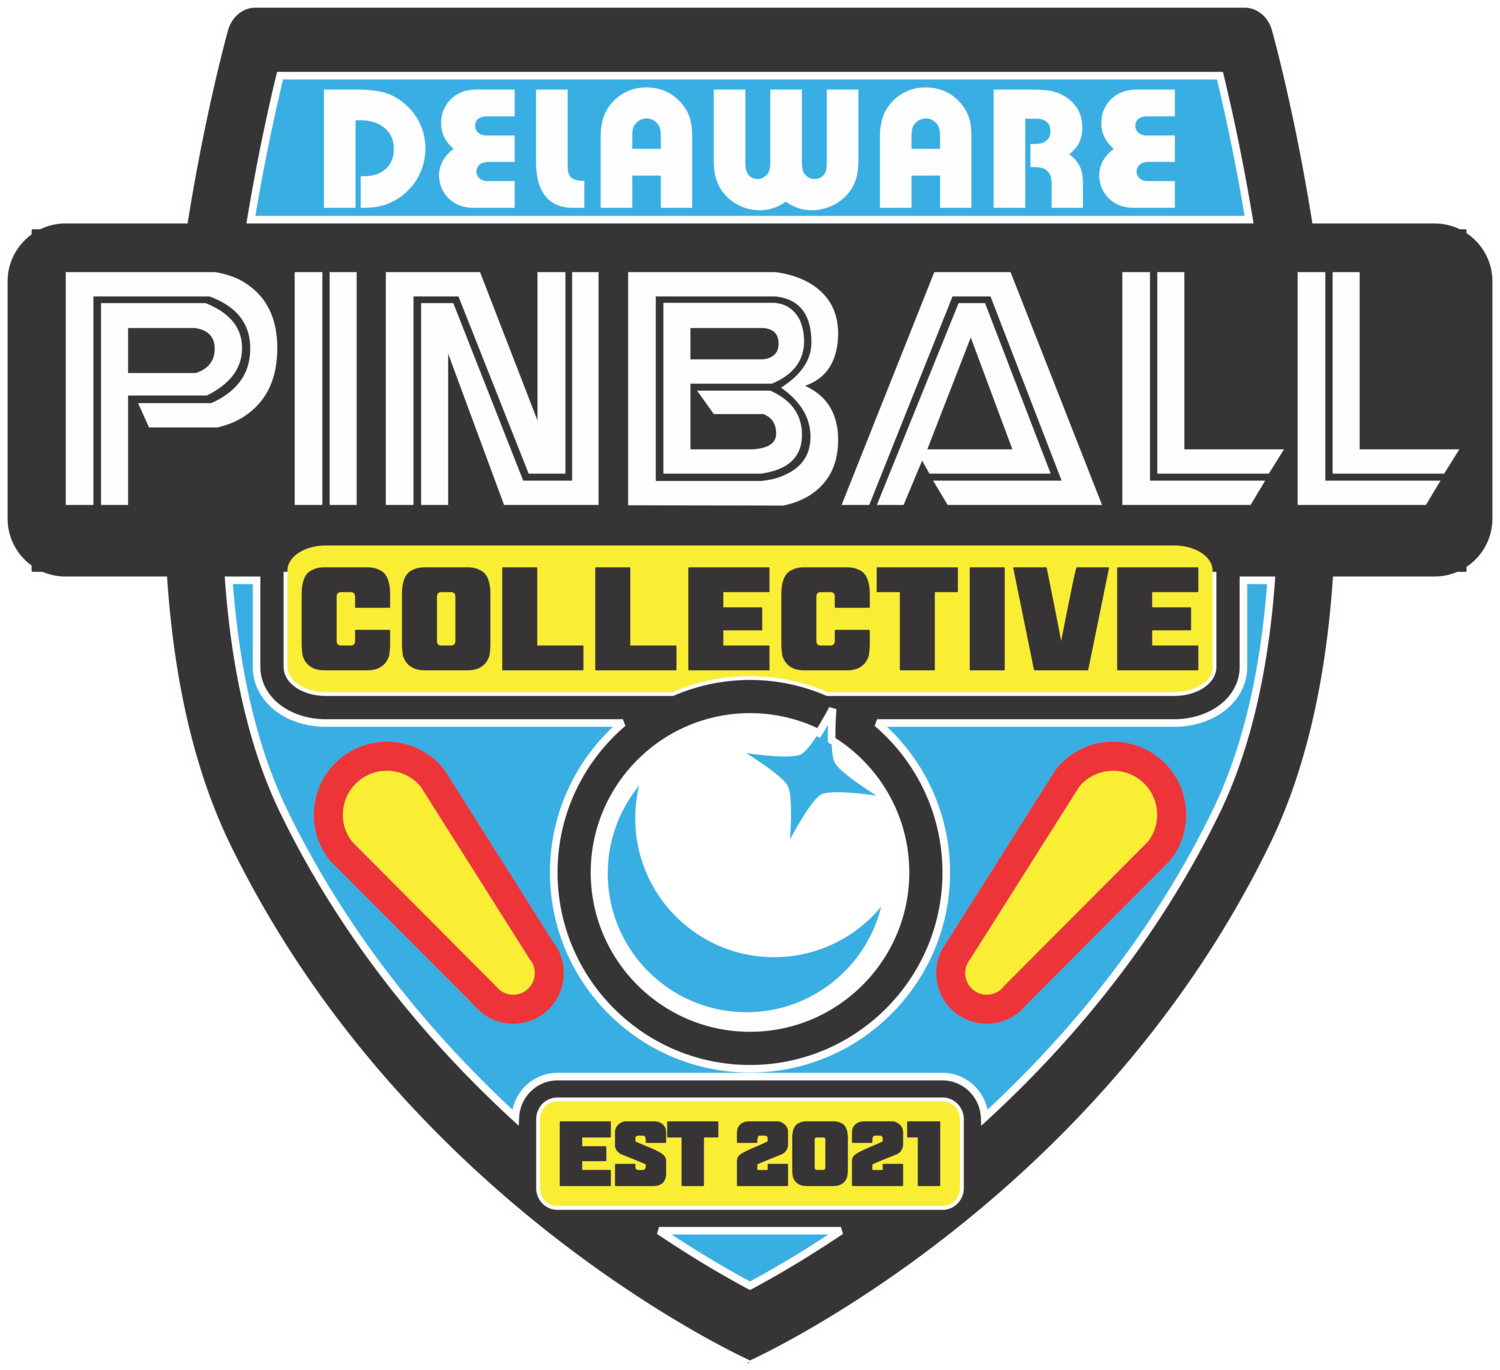 The Delaware Pinball Collective